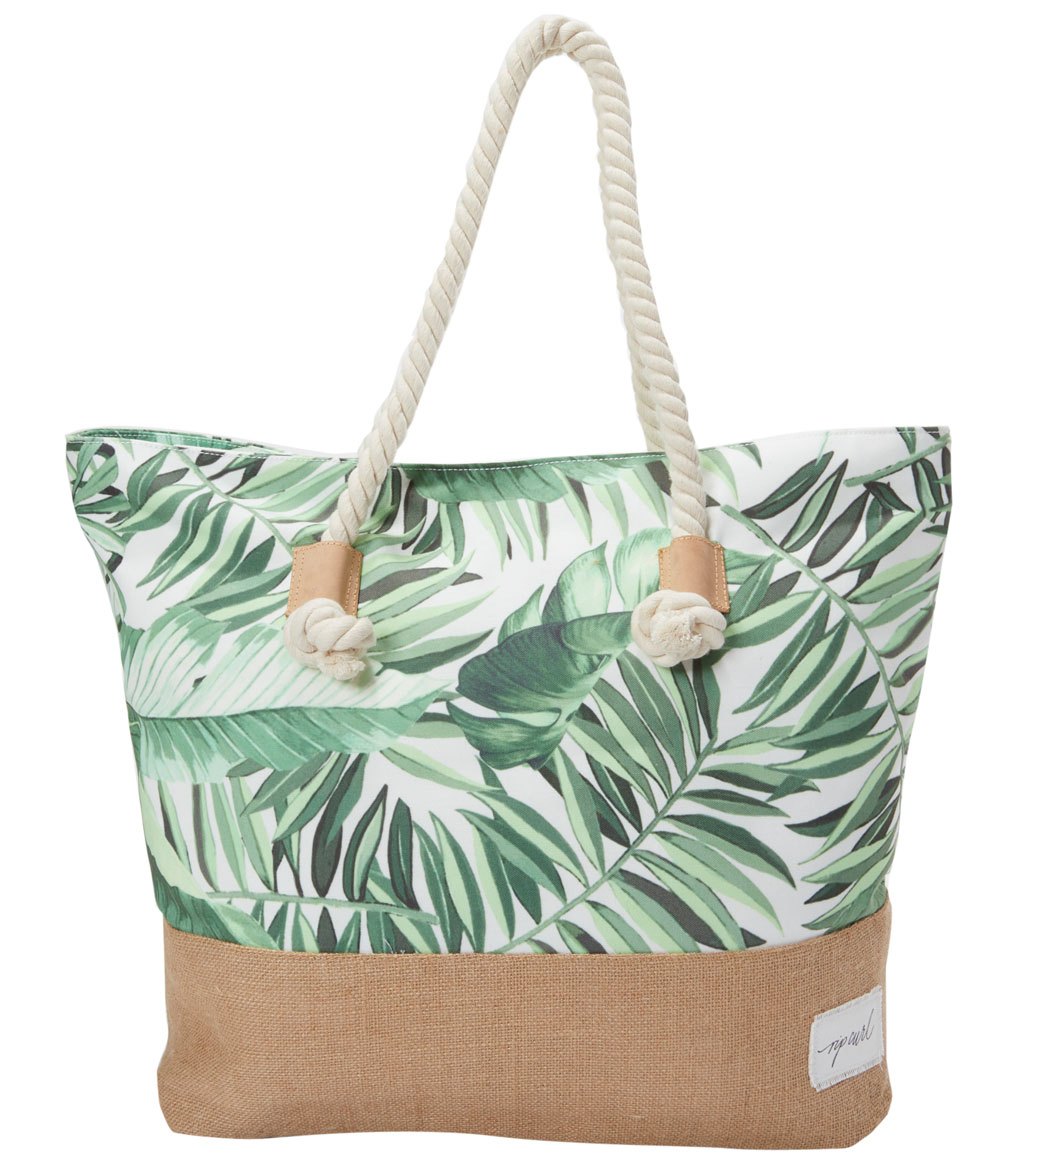 Rip Curl Palm Reader Beach Tote at SwimOutlet.com